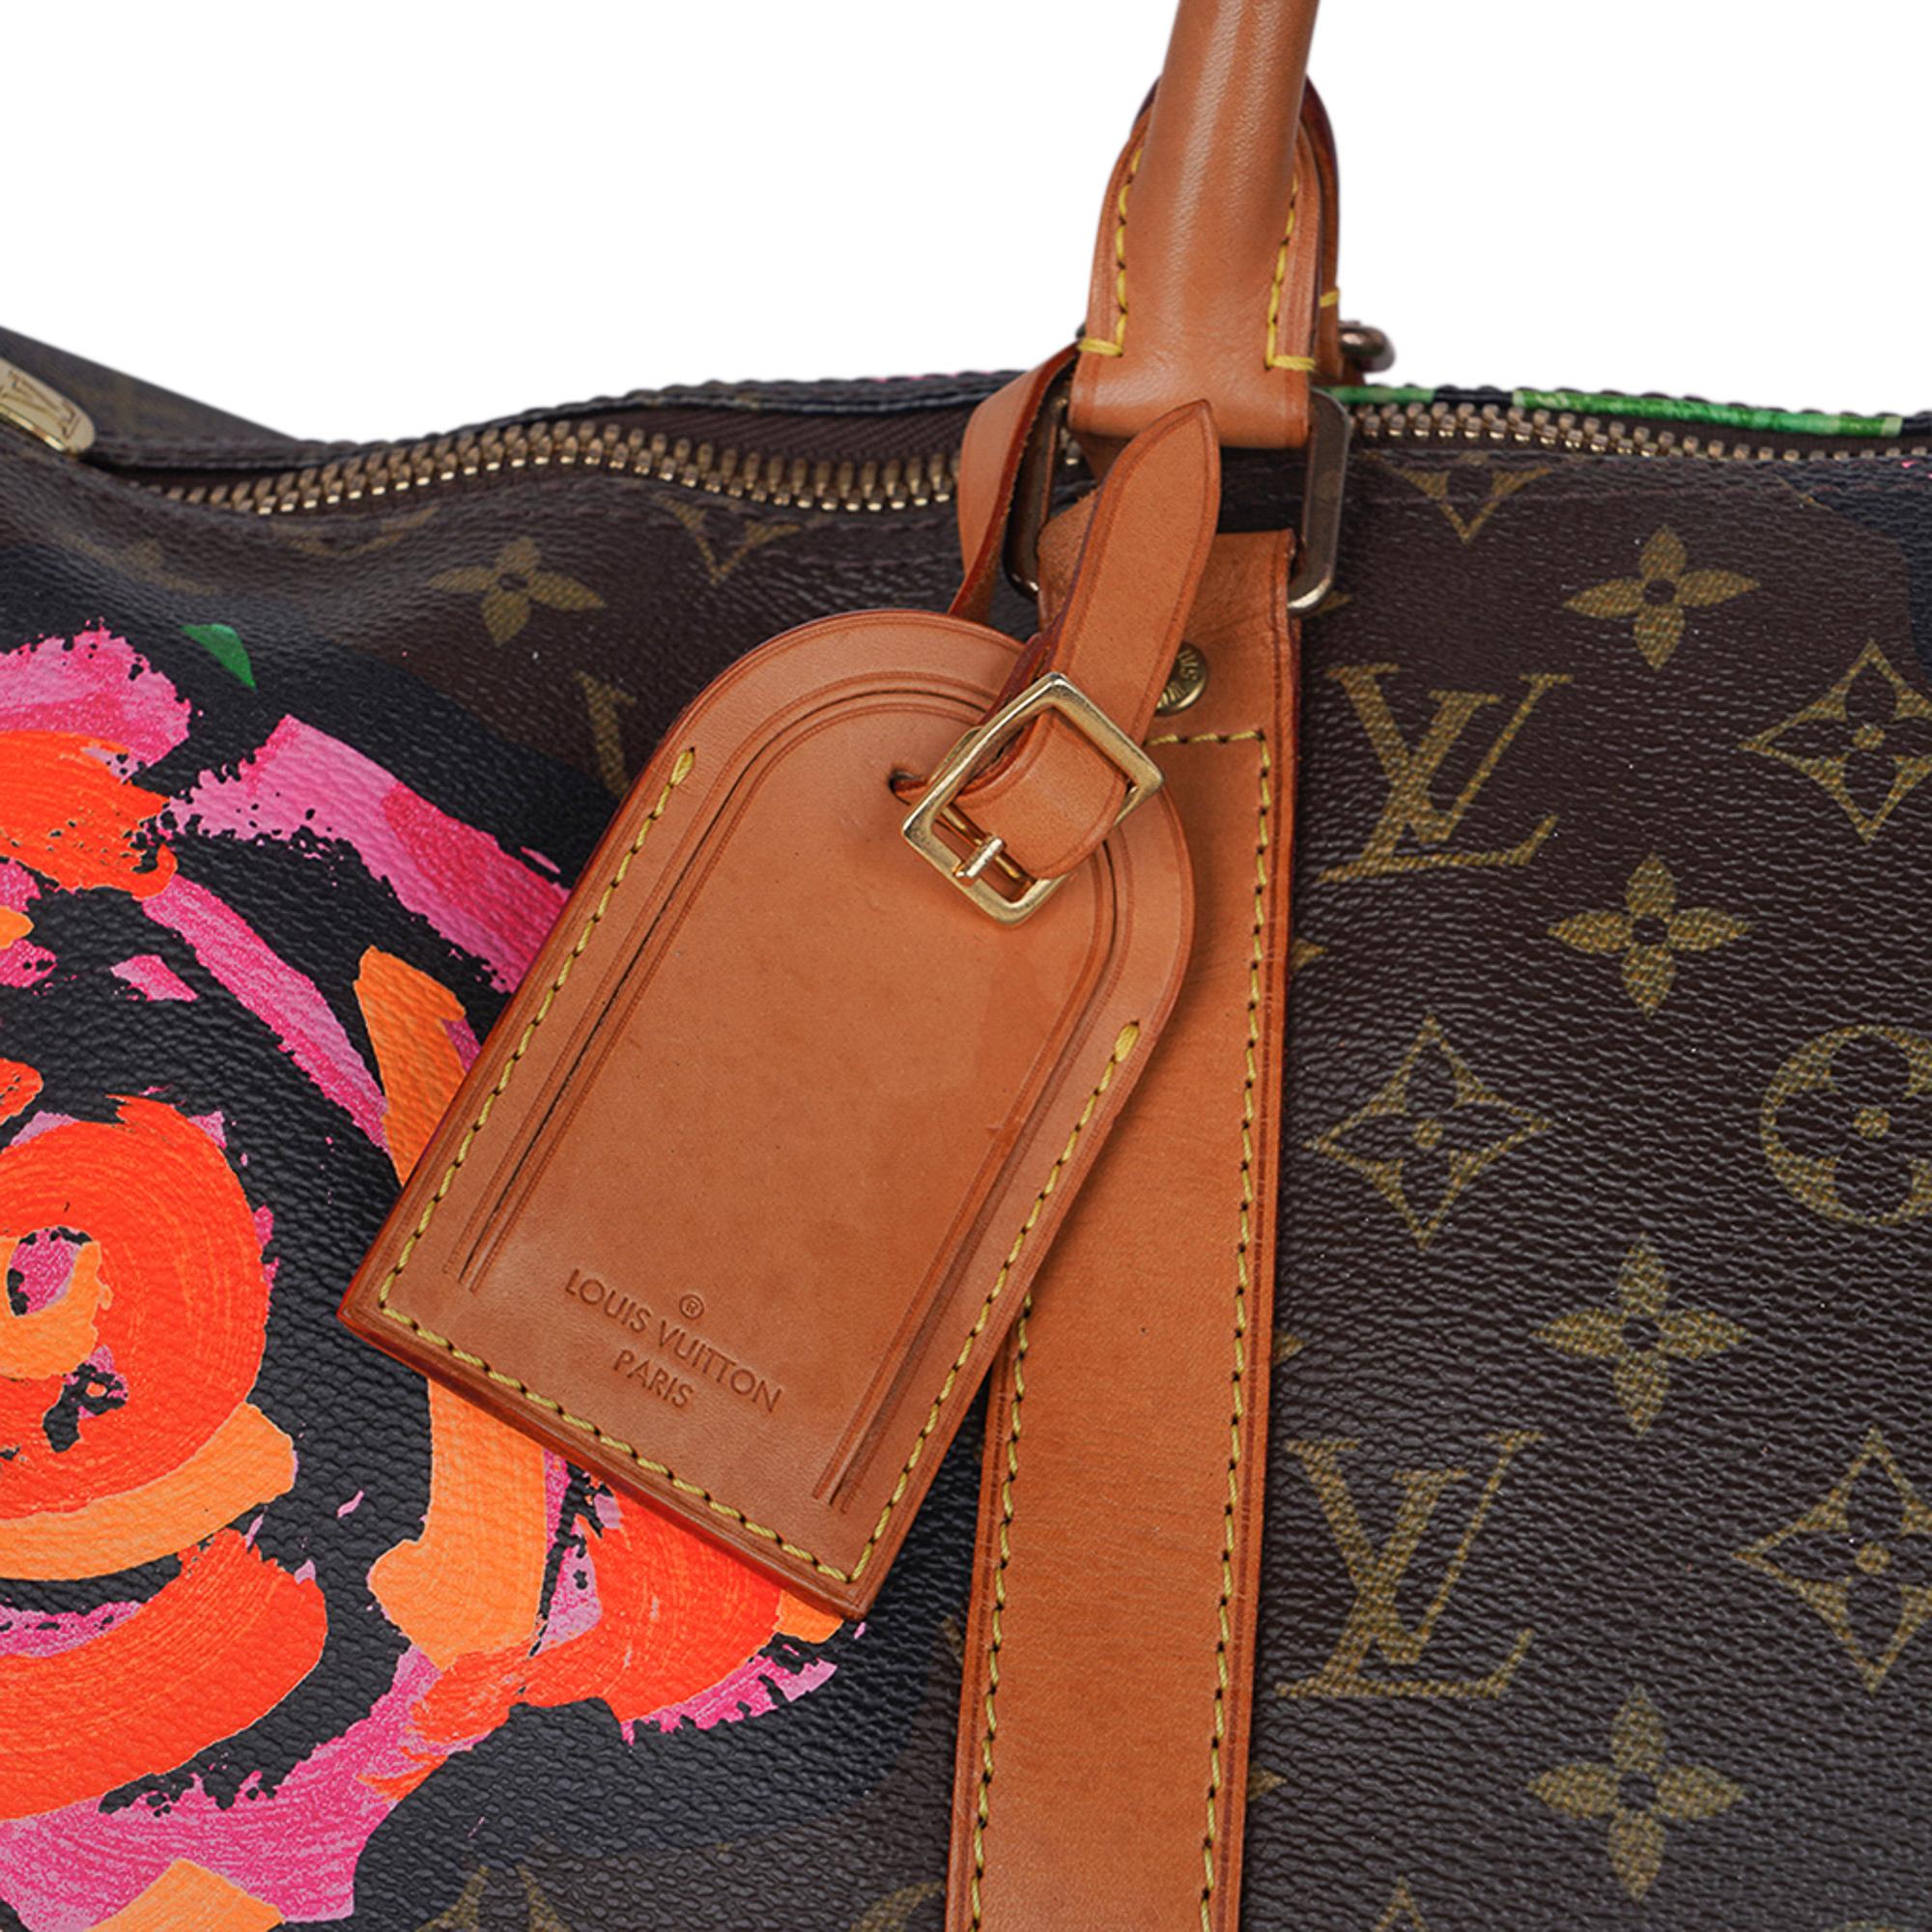 Louis Vuitton Stephen Sprouse x Monogram Roses Keepall 50 Limited Edition For Sale 3